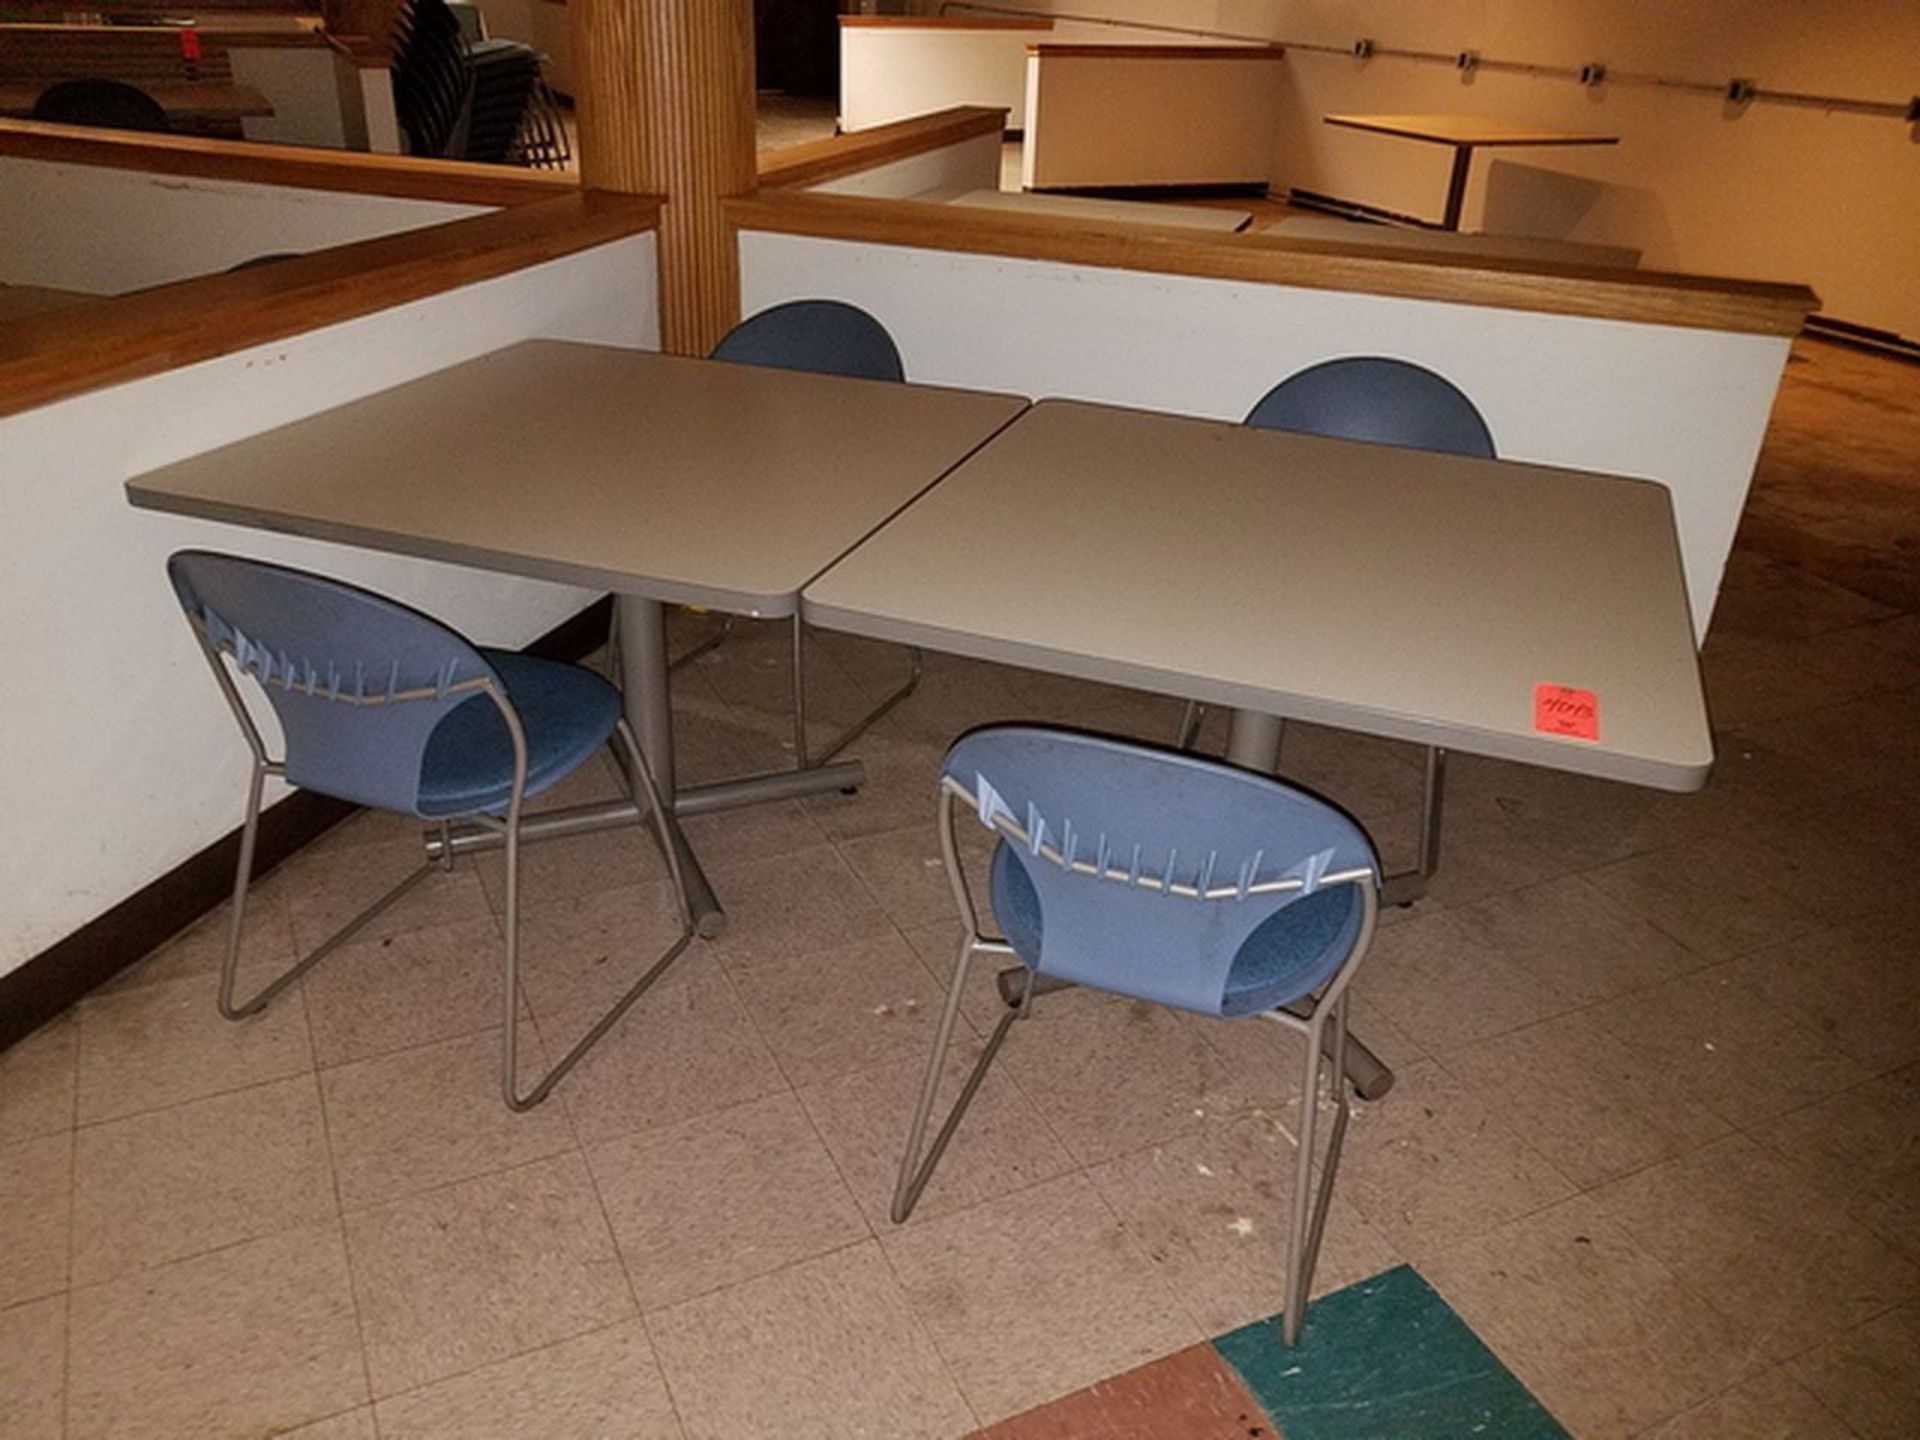 Lot of (4) Formica Top Cafeteria Tables, 42" x 42", includes 8 stacking chairs. Loc: Basement